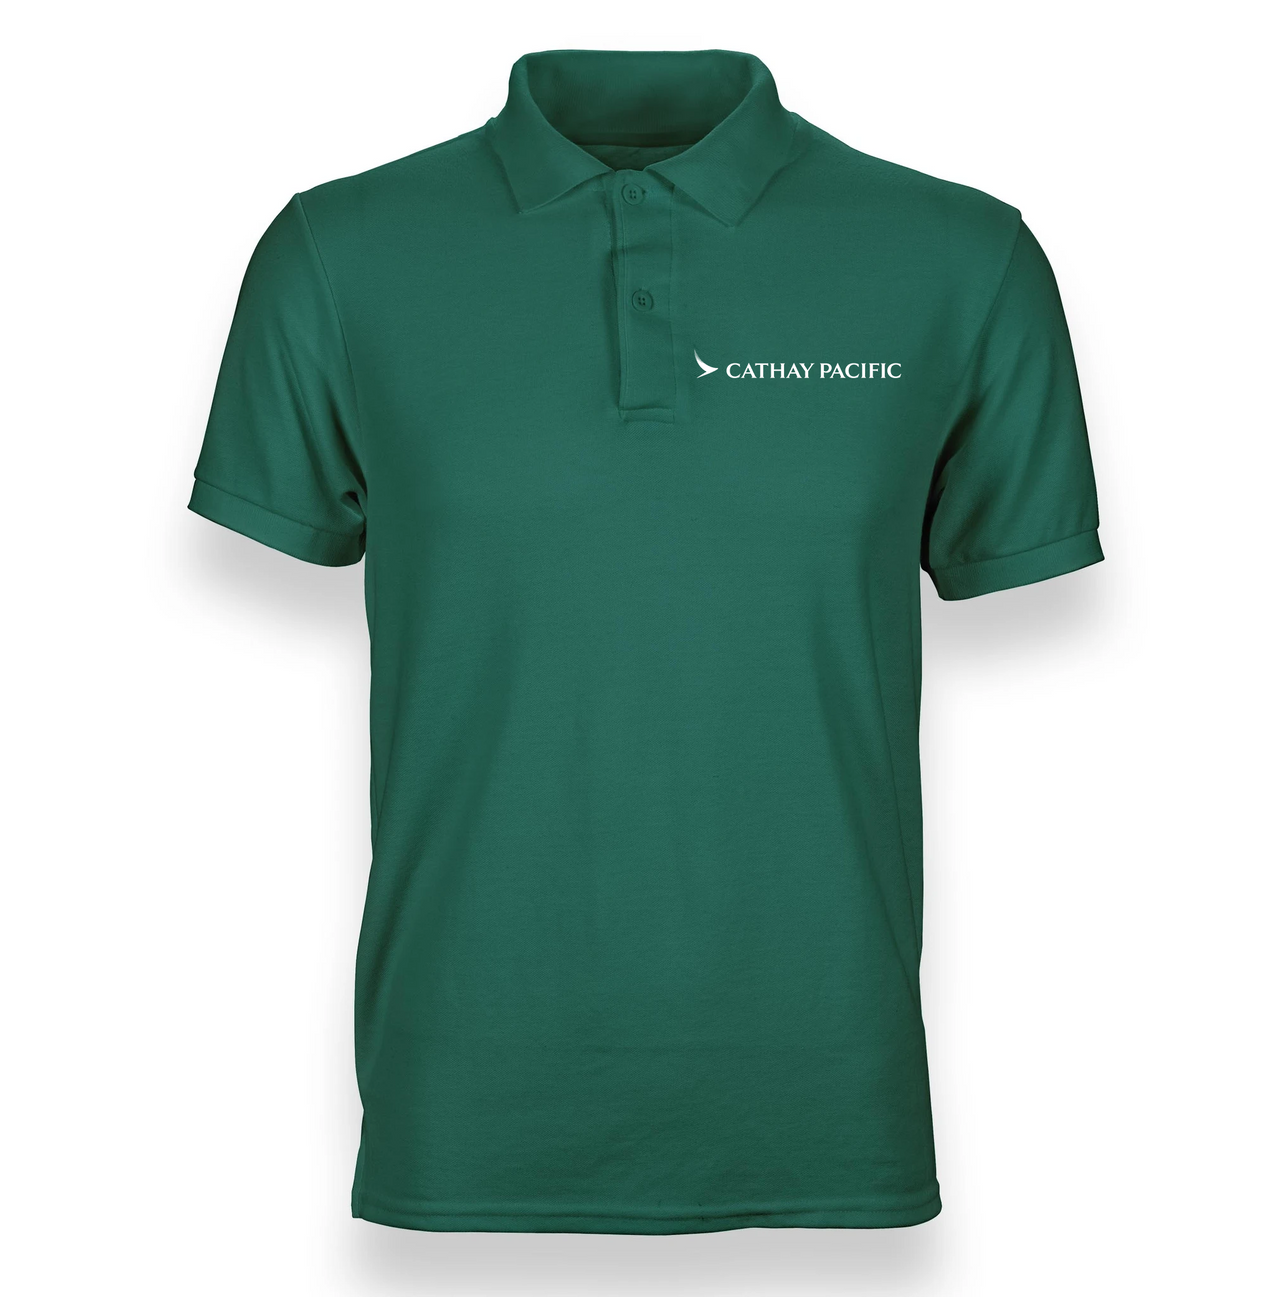 CATHAY AIRLINES POLO T-SHIRT